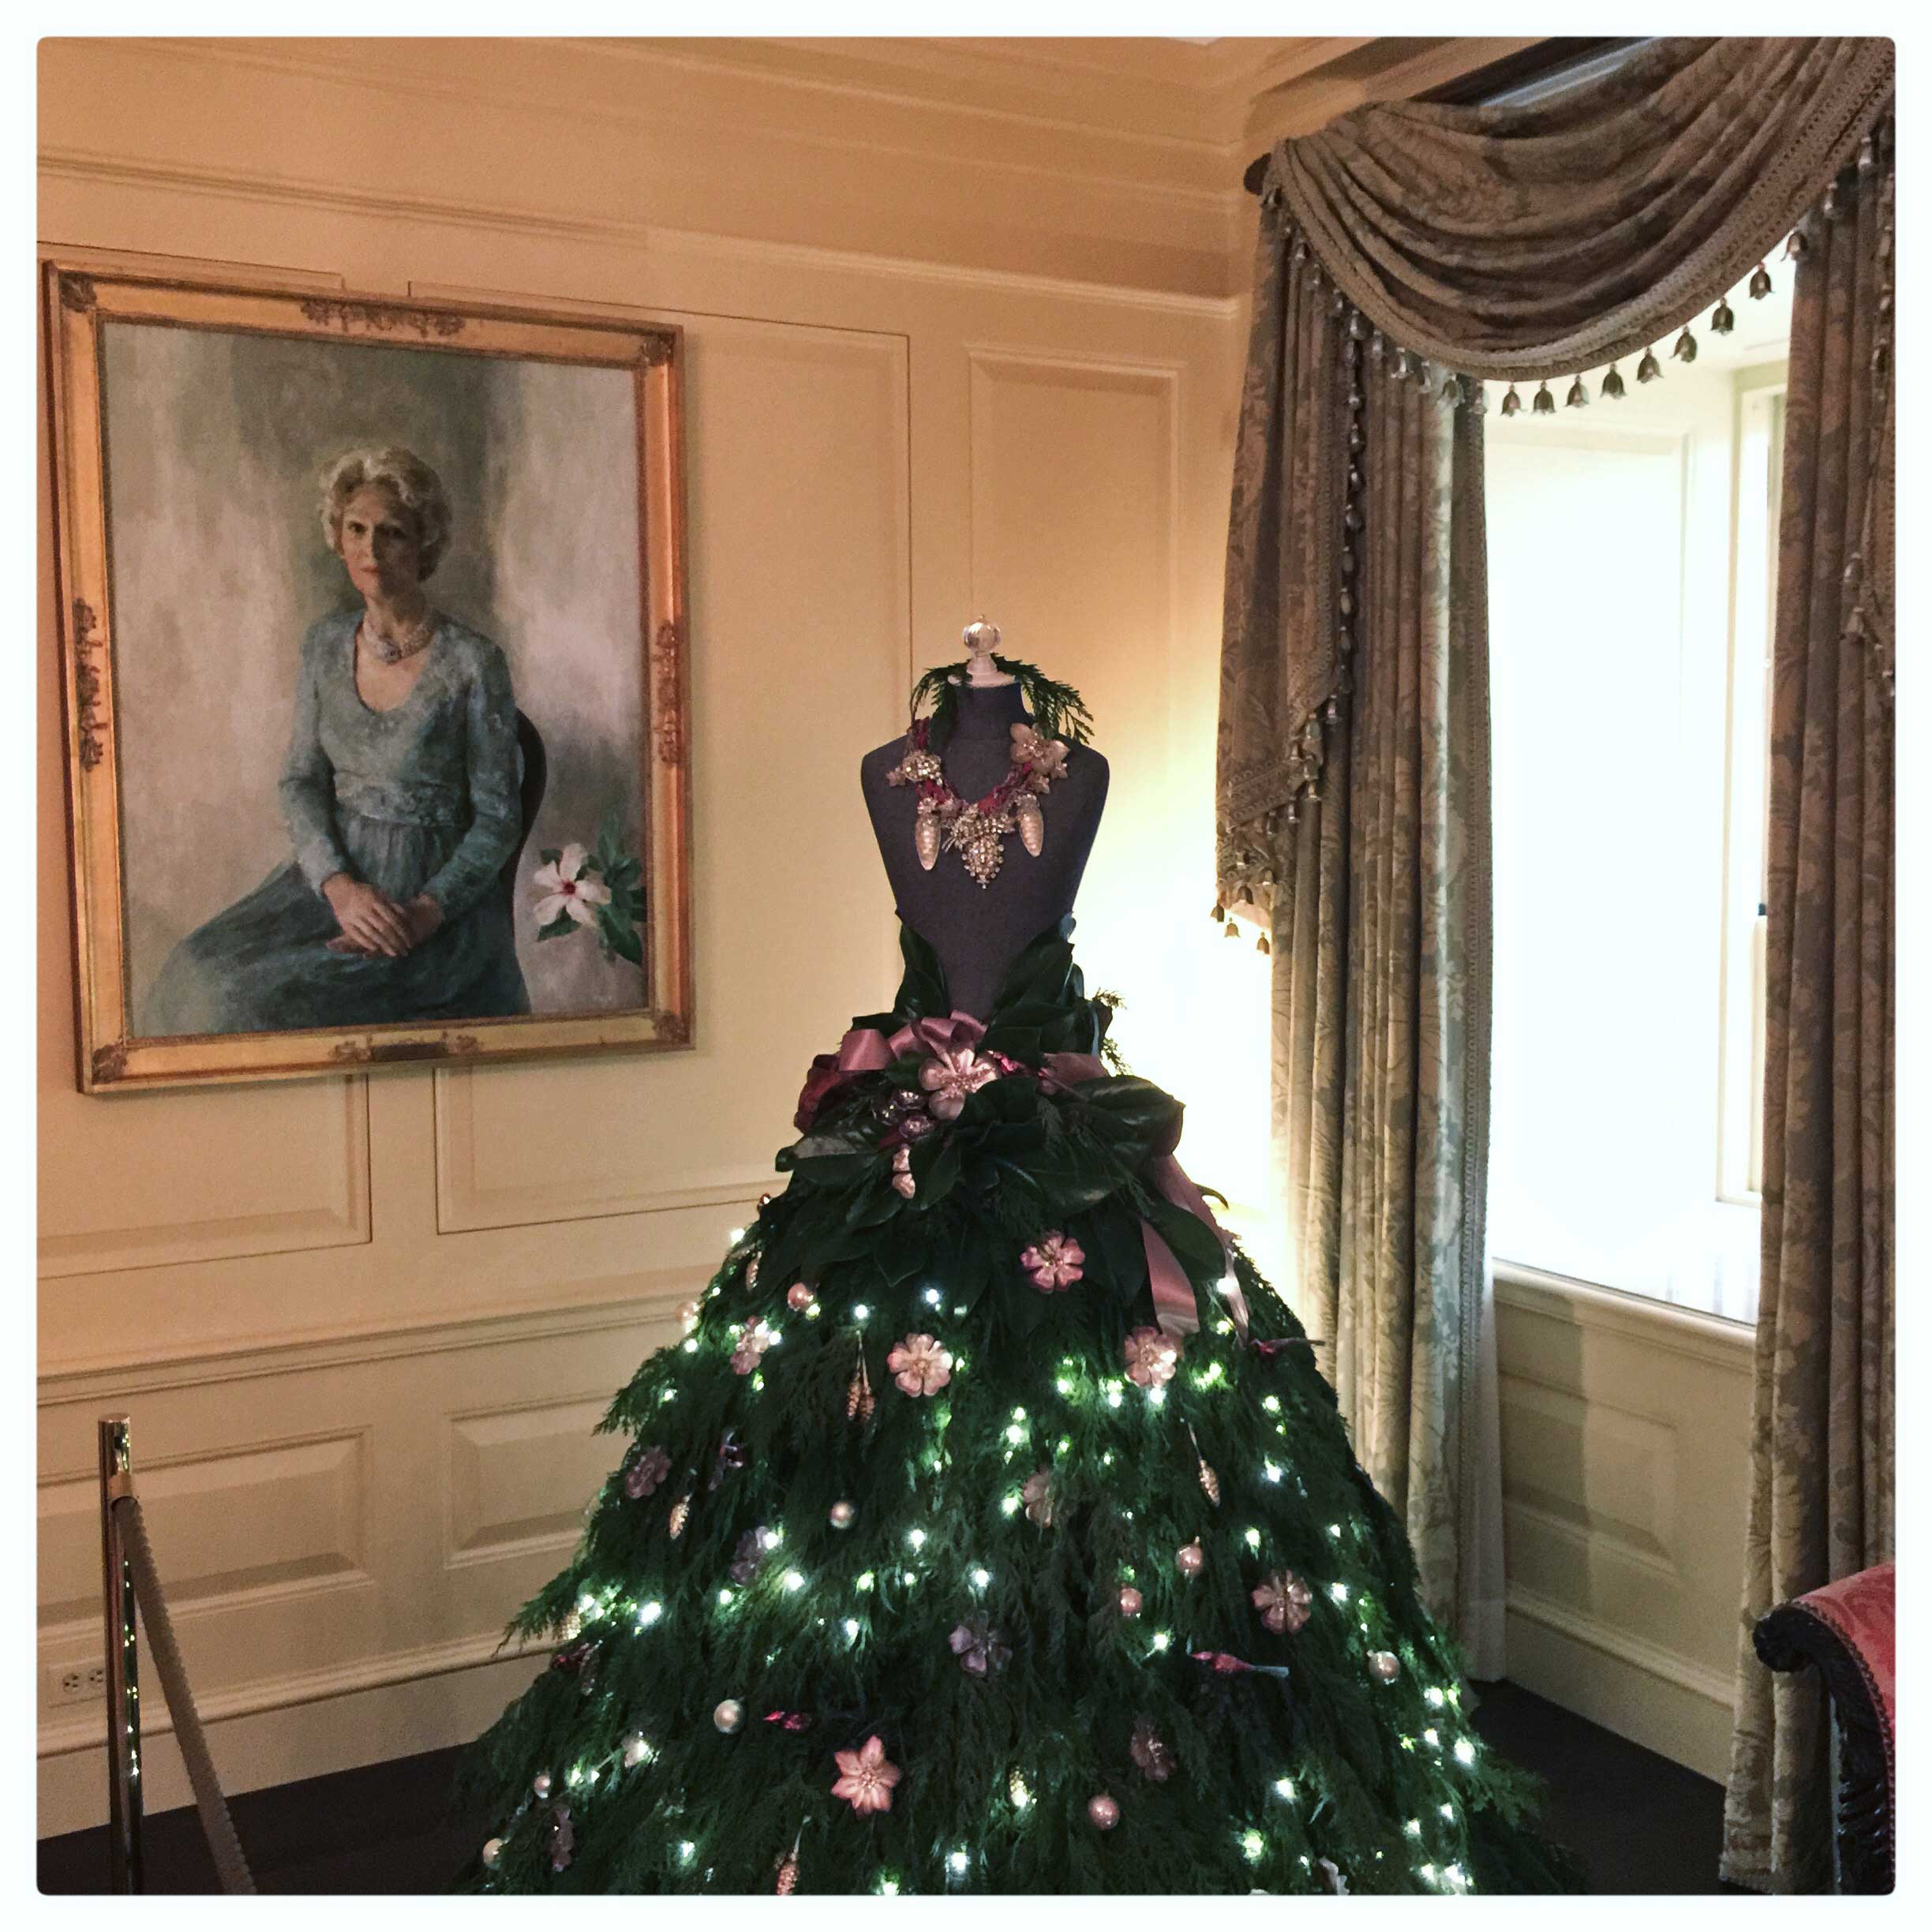 A dress mannequin in the shape of a Christmas tree in the Vermeil Room at the White House.